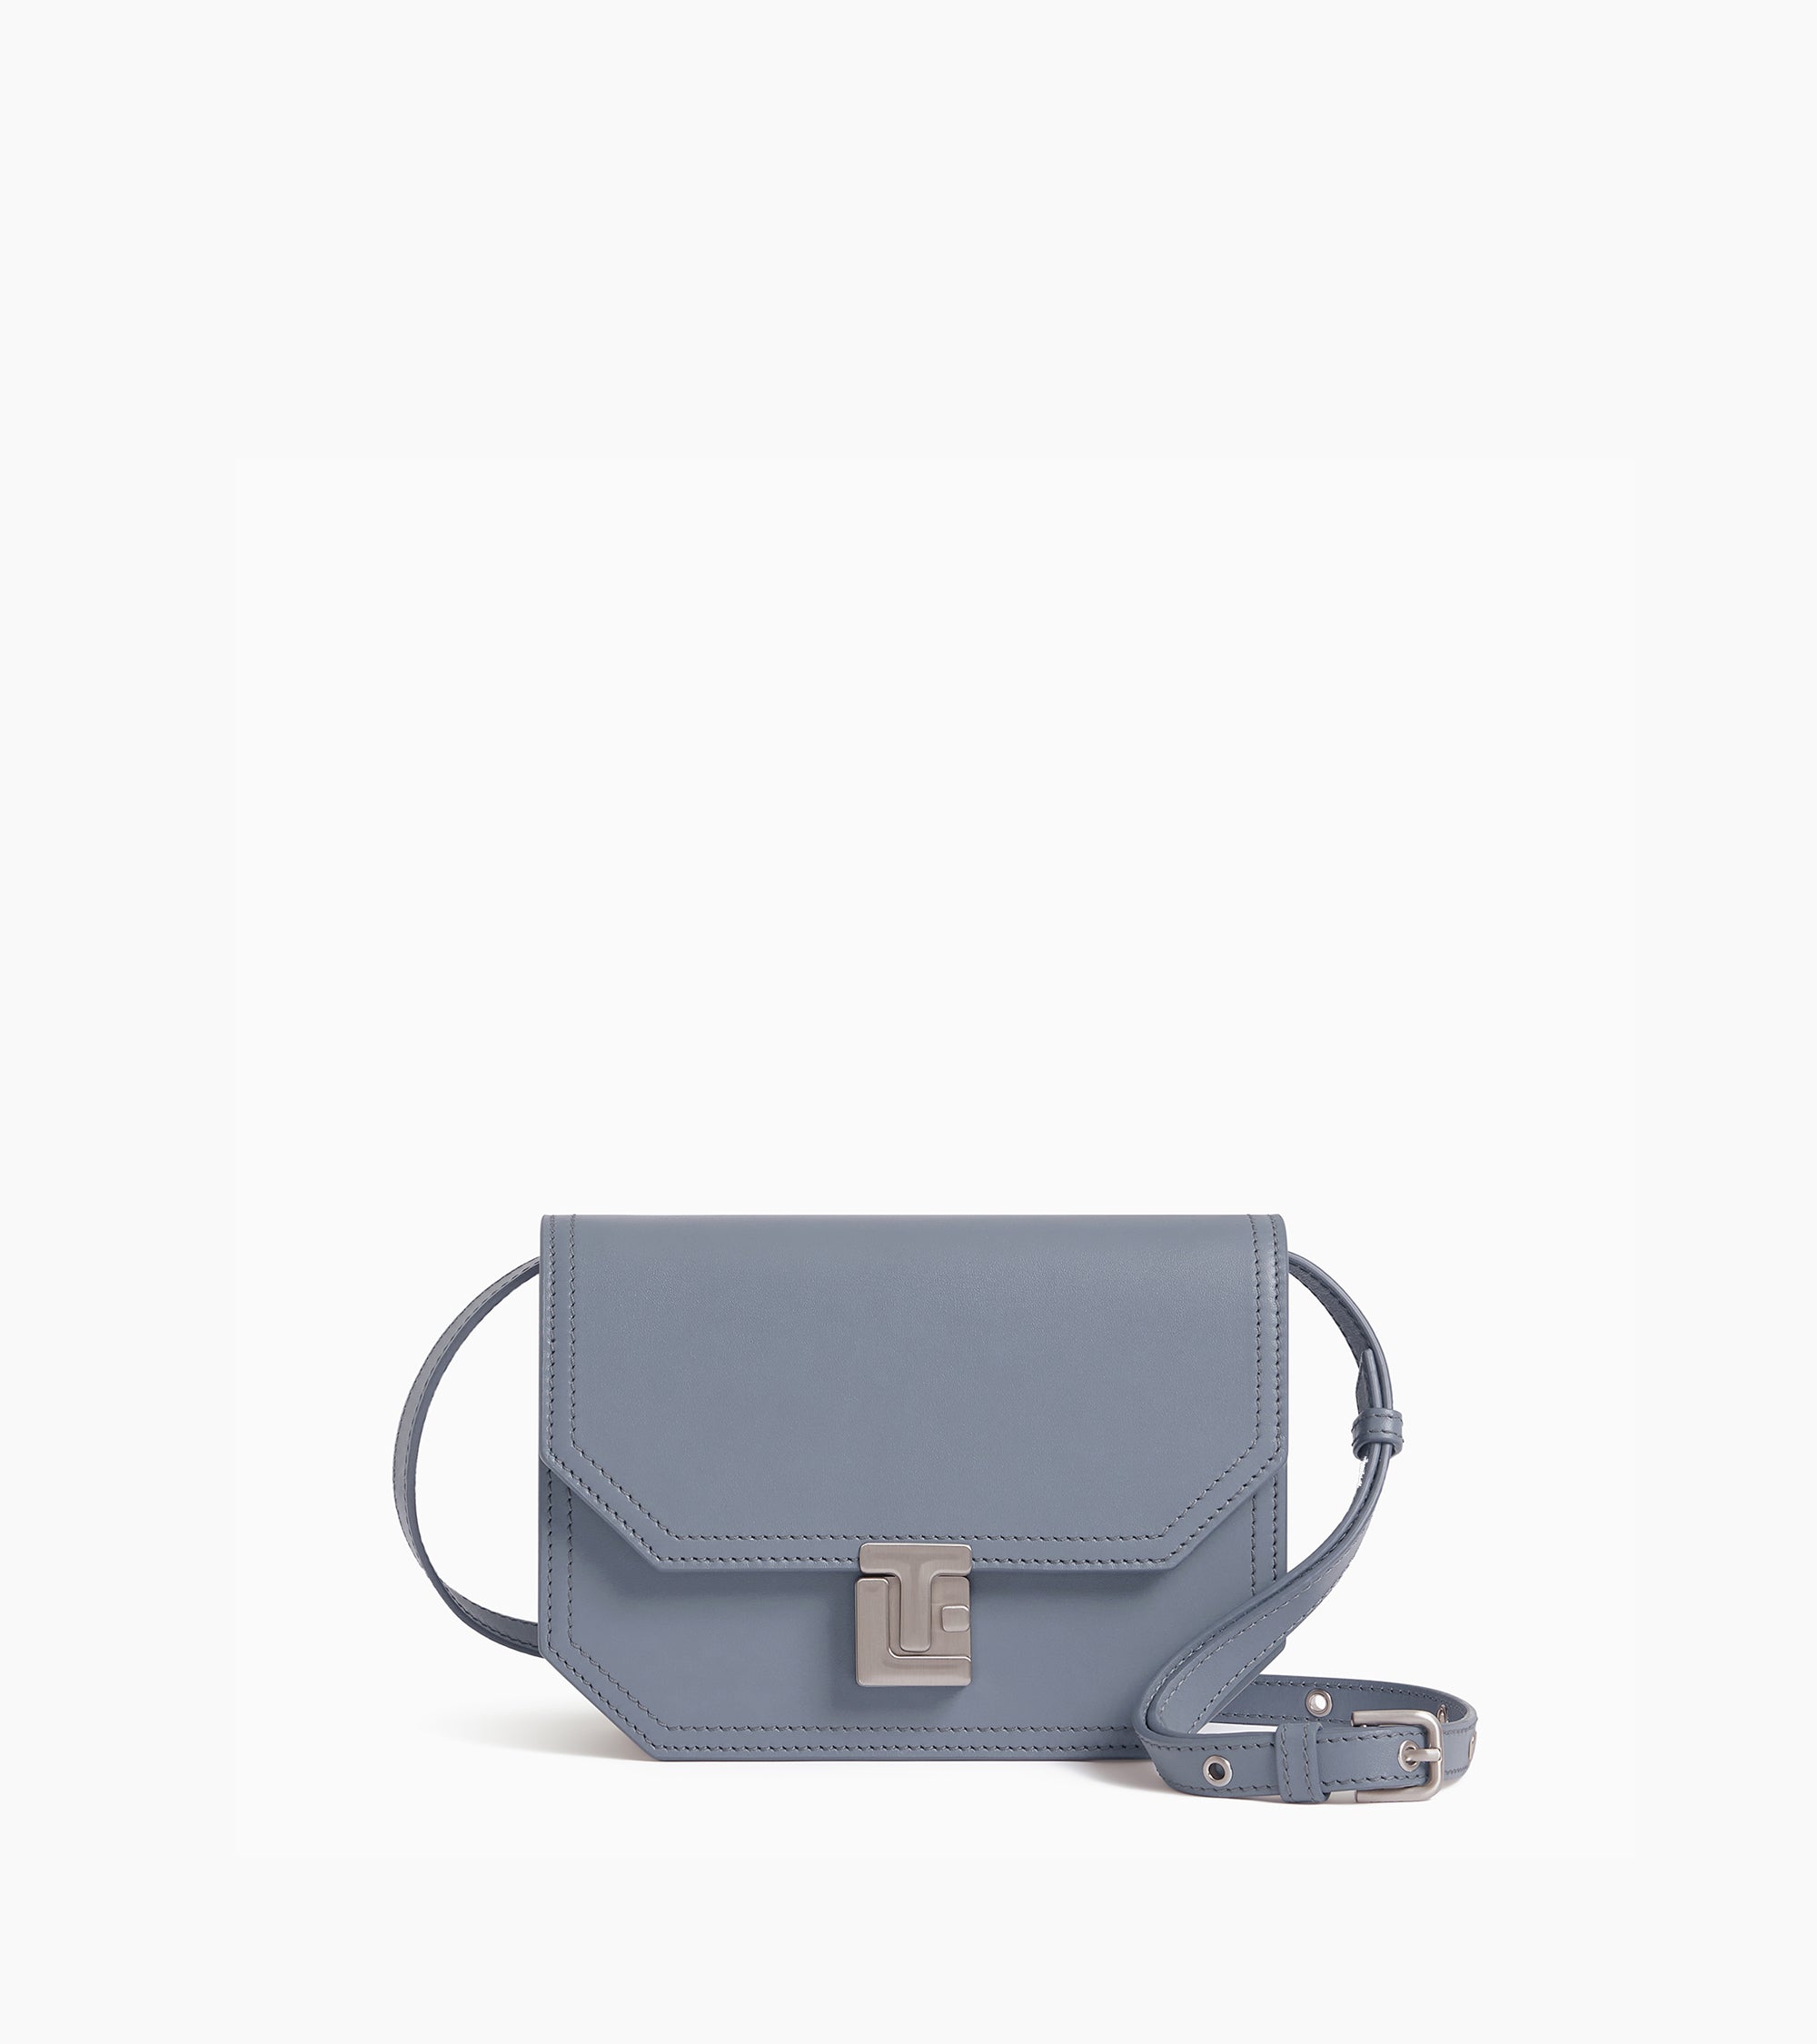 Rose small shoulder bag in smooth leather